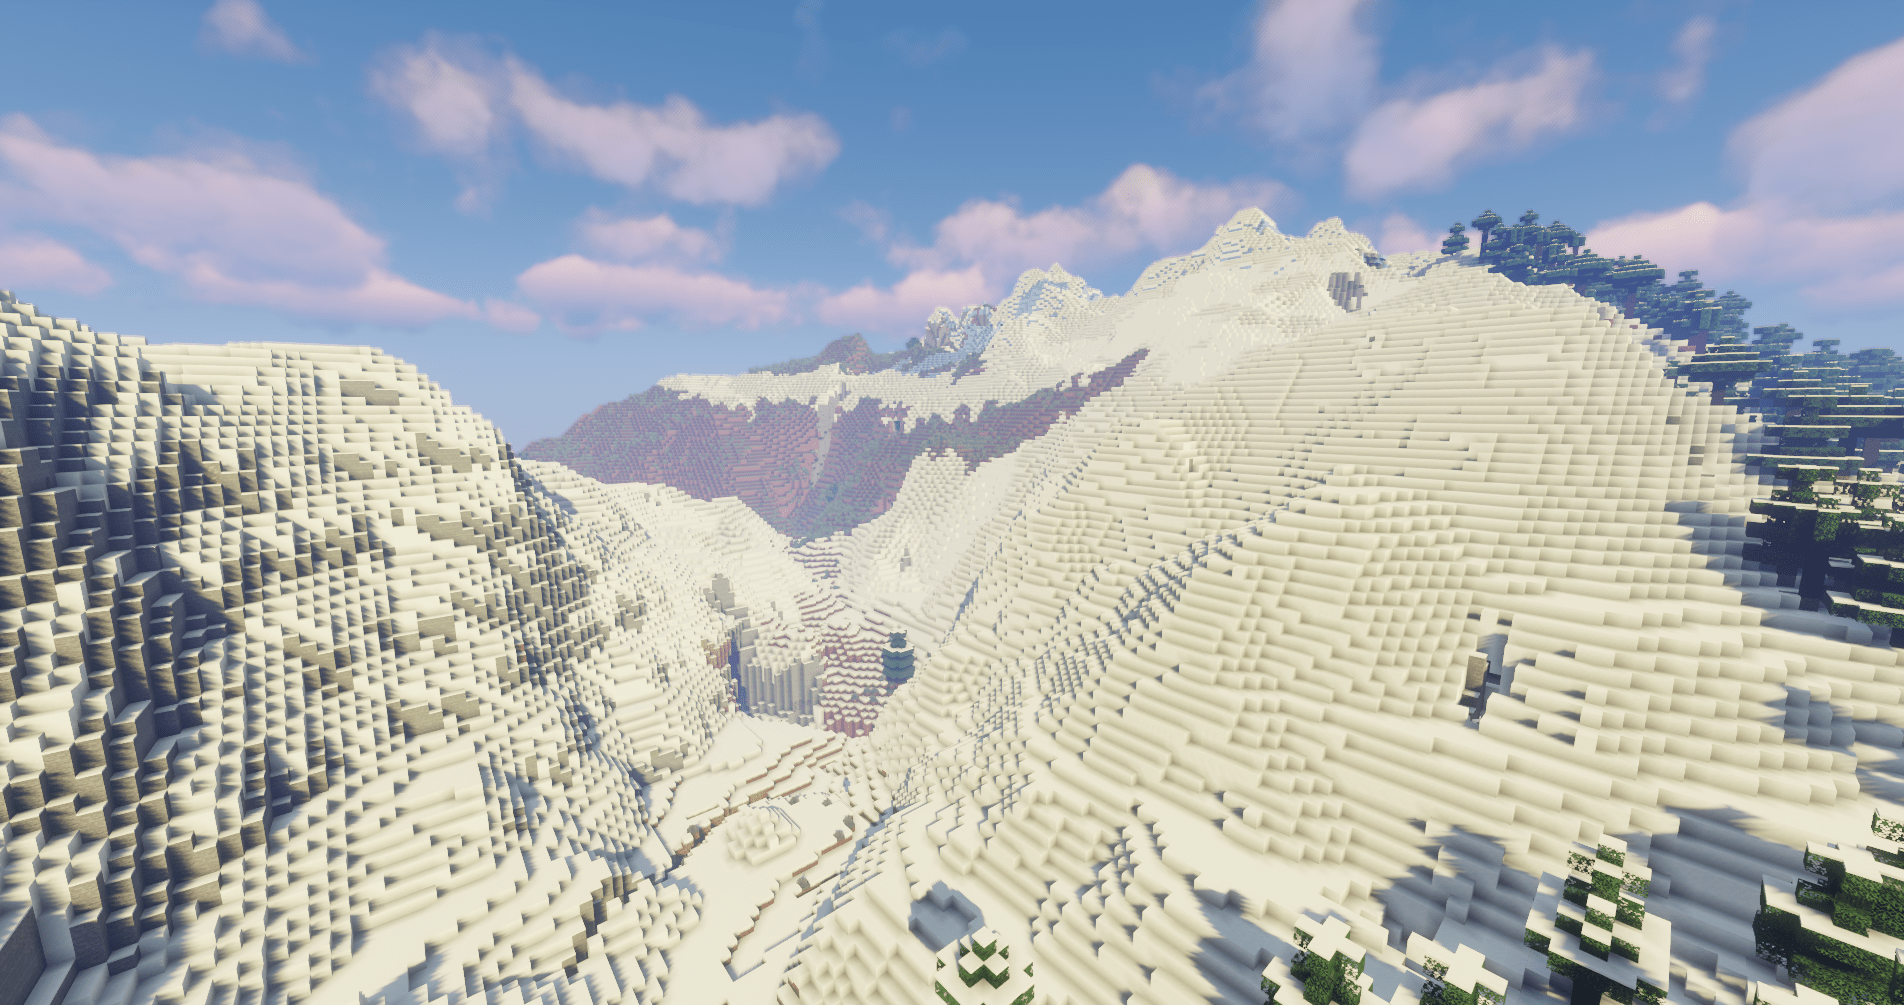 Picture of the snowy slope in minecraft